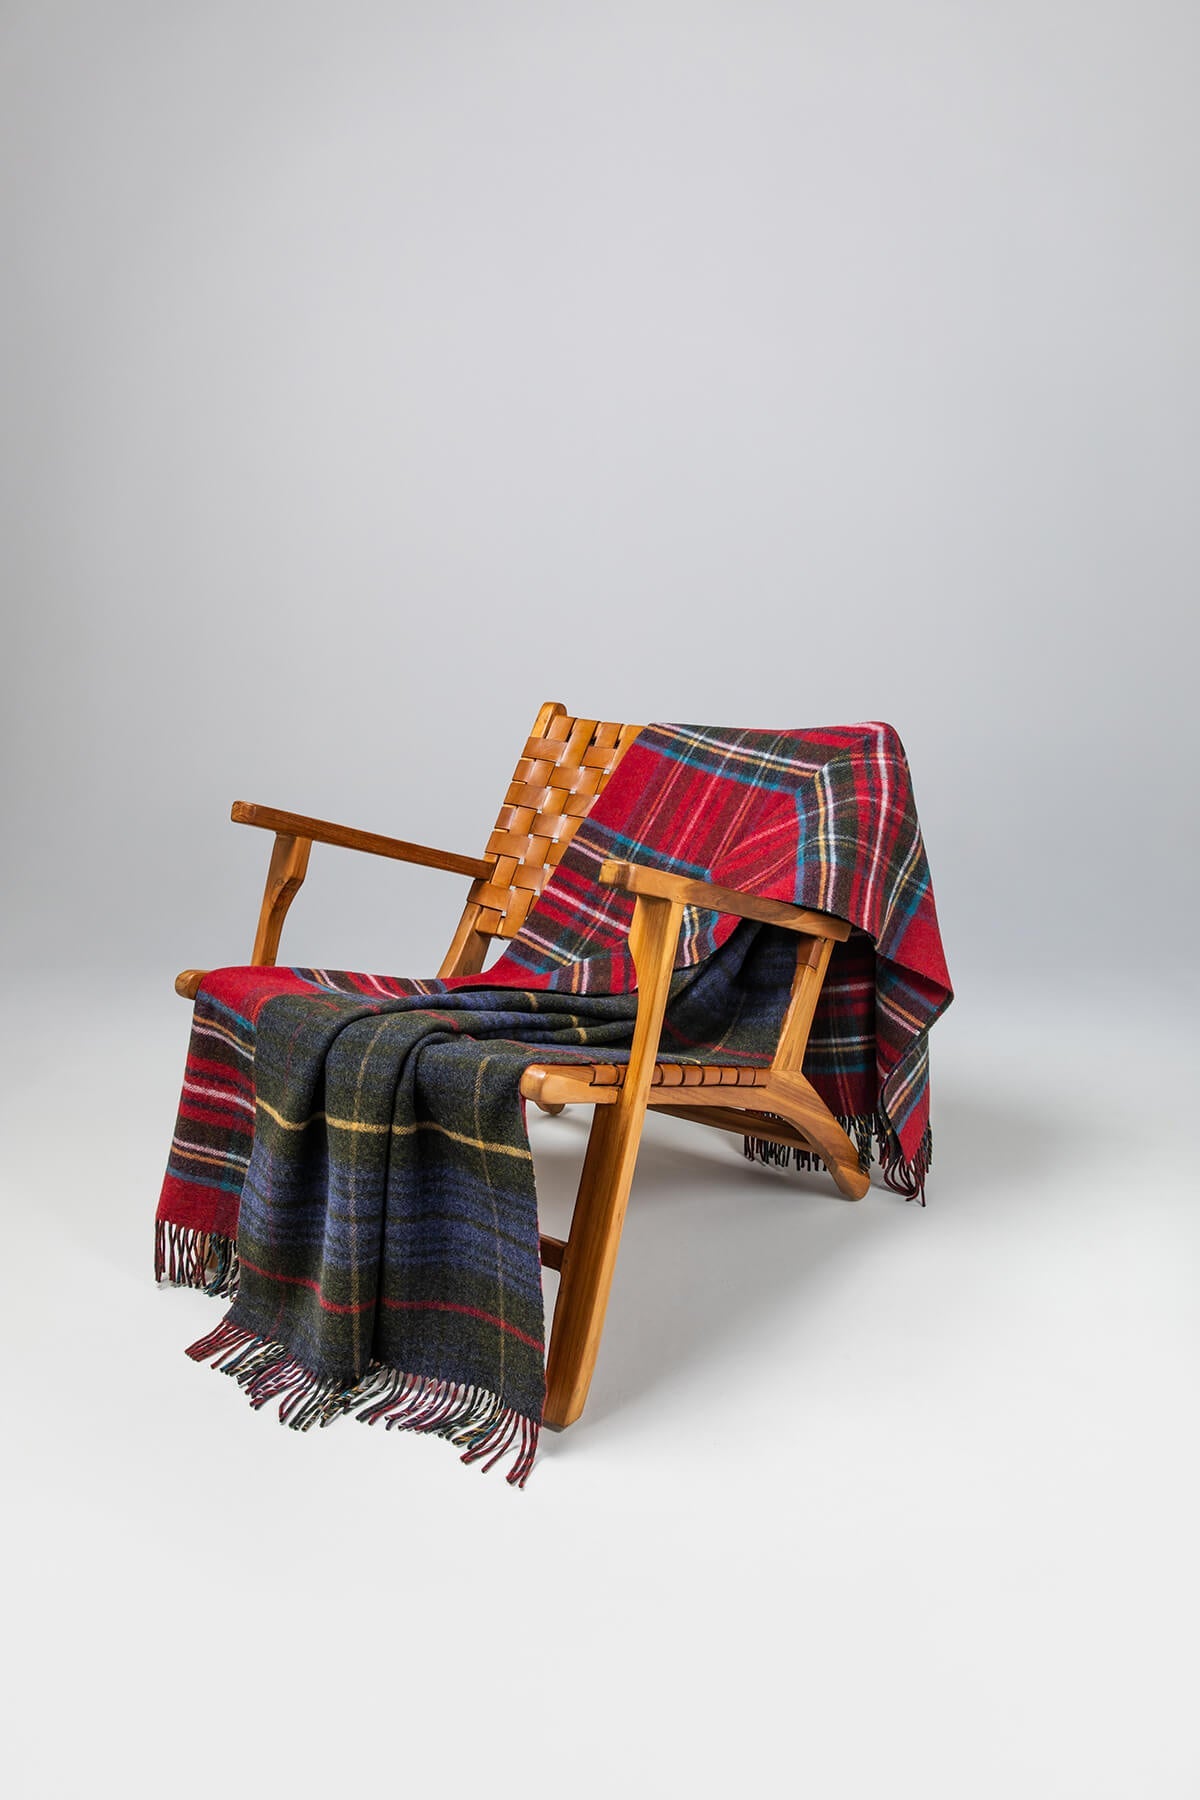 Johnstons of Elgin’s Double Face Hunting Stewart Check Lambswool Throw on brown chair on a grey background WD000021XU0033N/A